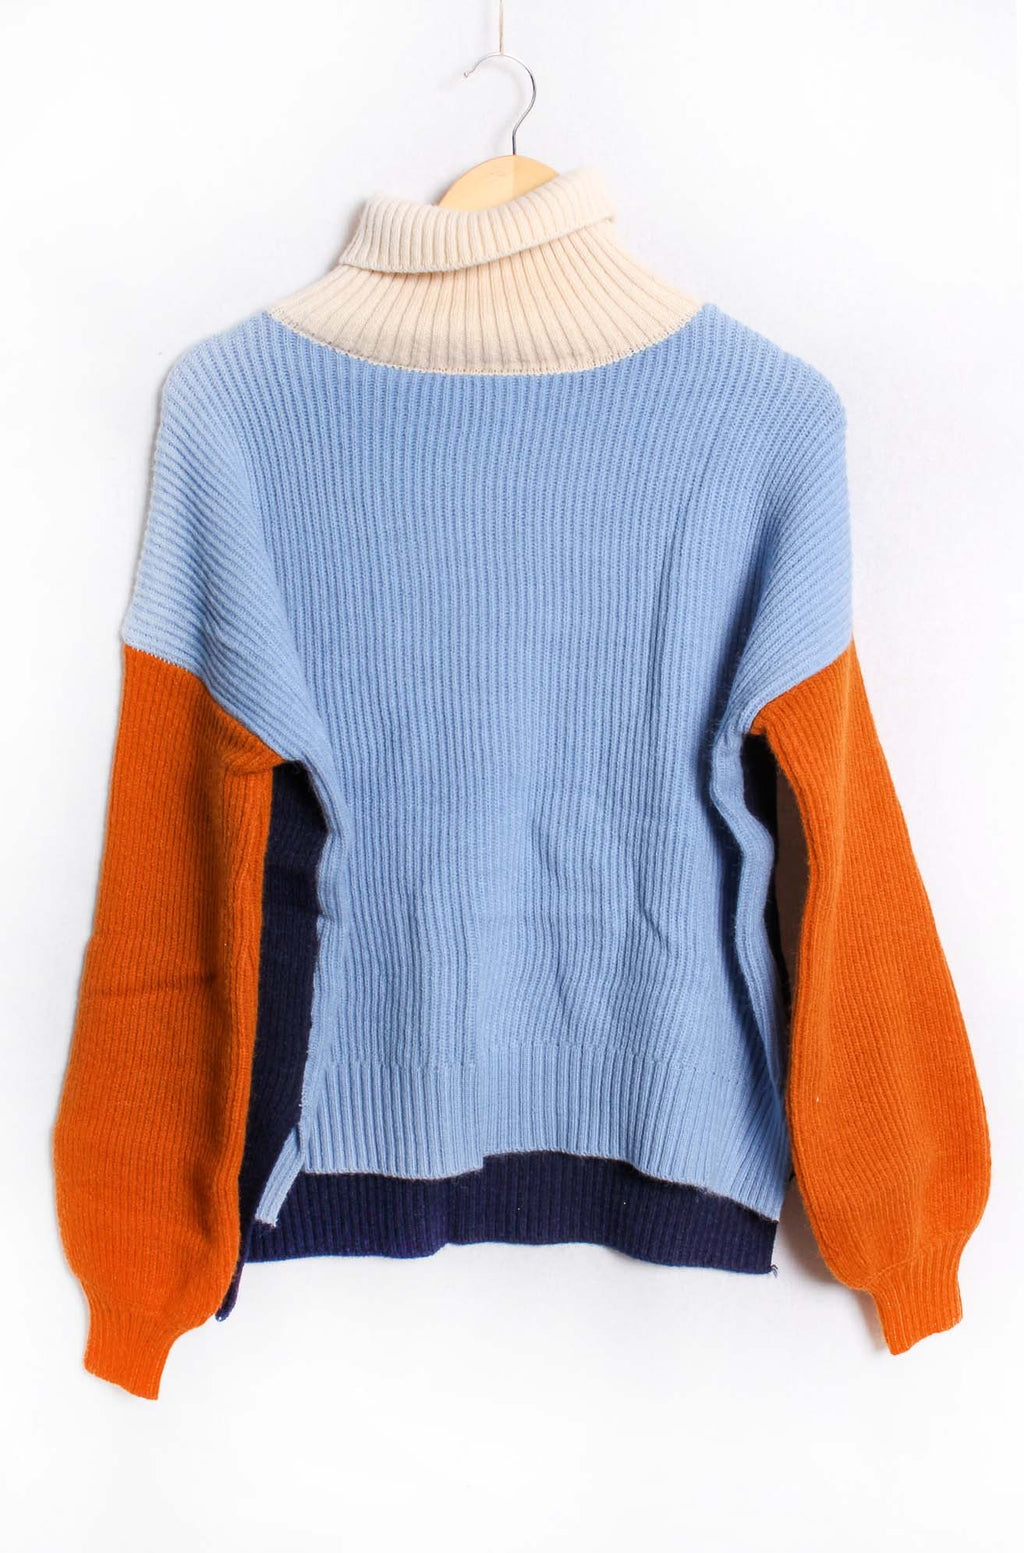 Women's Long Sleeve Cowl Neck Colorblock Knitted Sweater